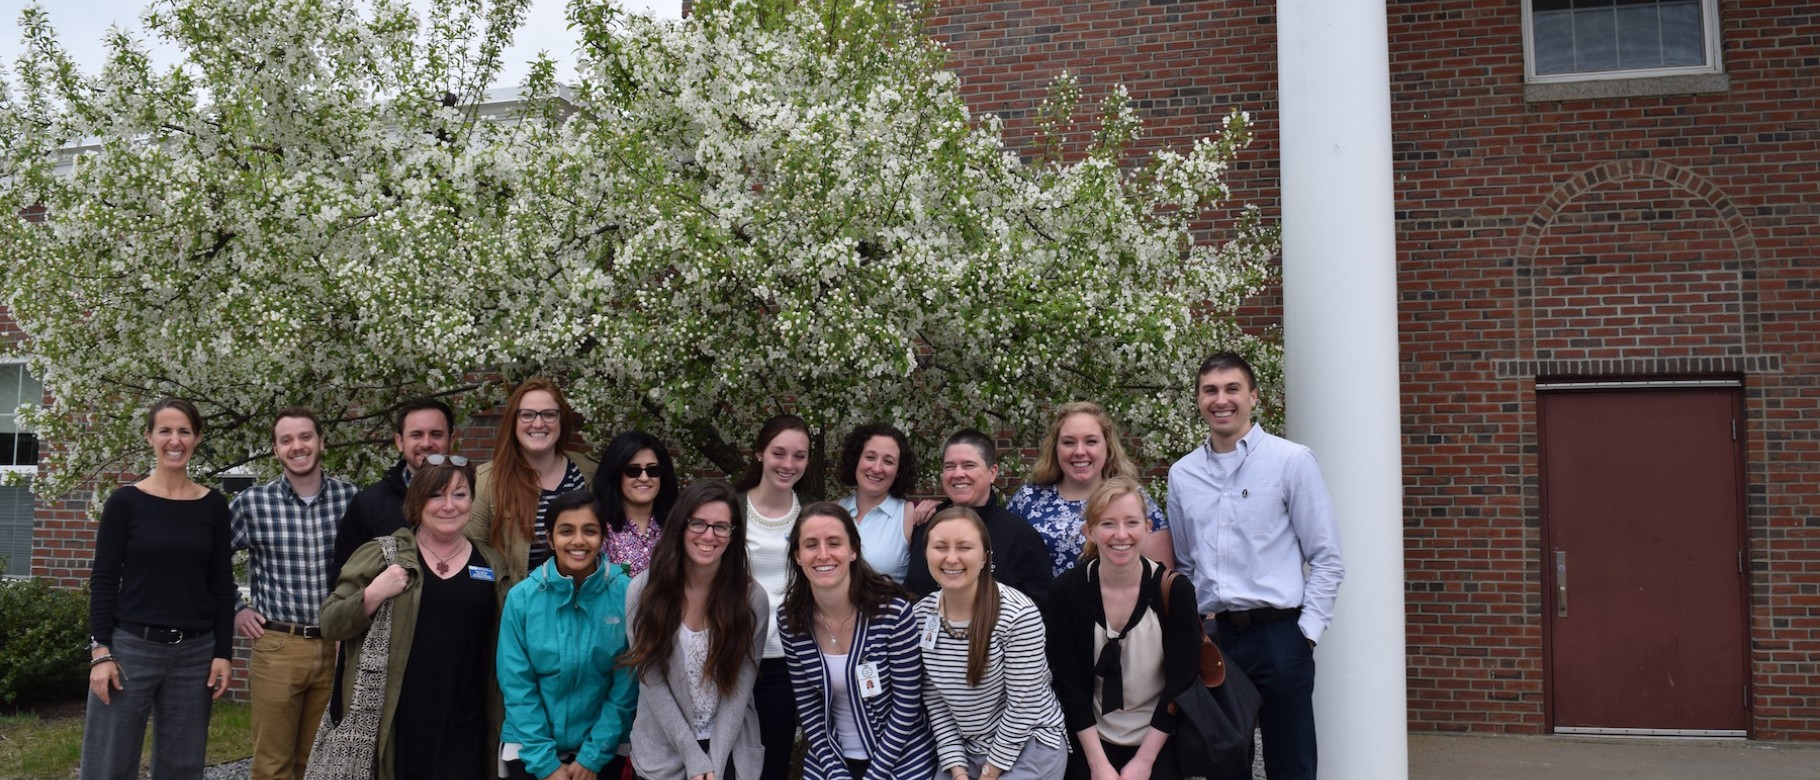 Students and faculty participating in the third rural health immersion of the year